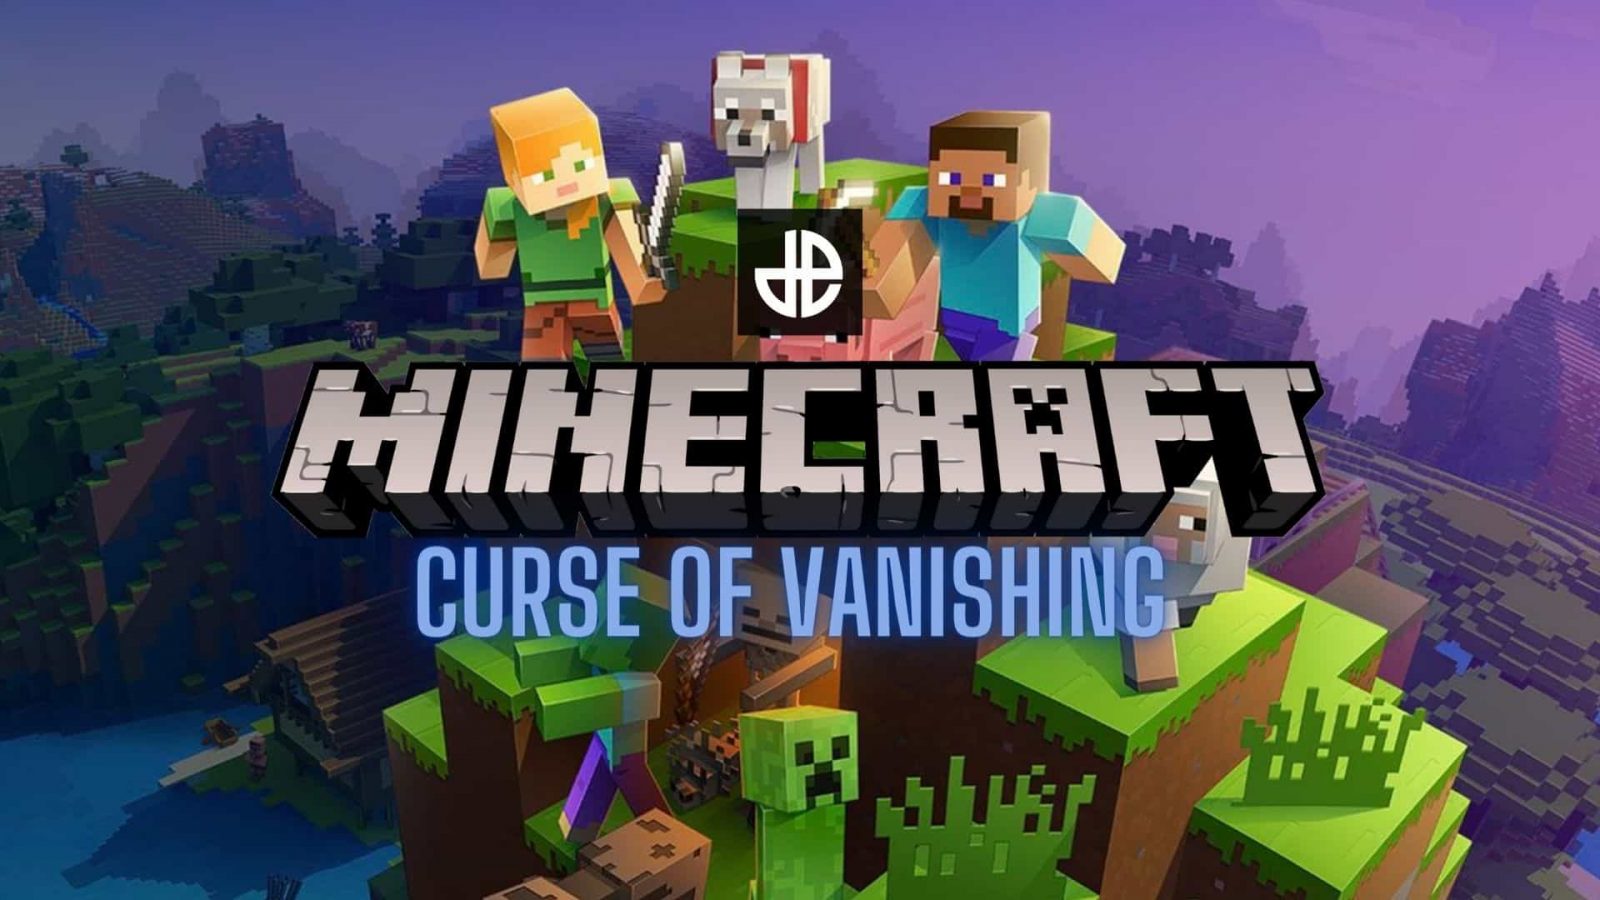 How to get rid of curse of vanishing in Minecraft - Pro Game Guides